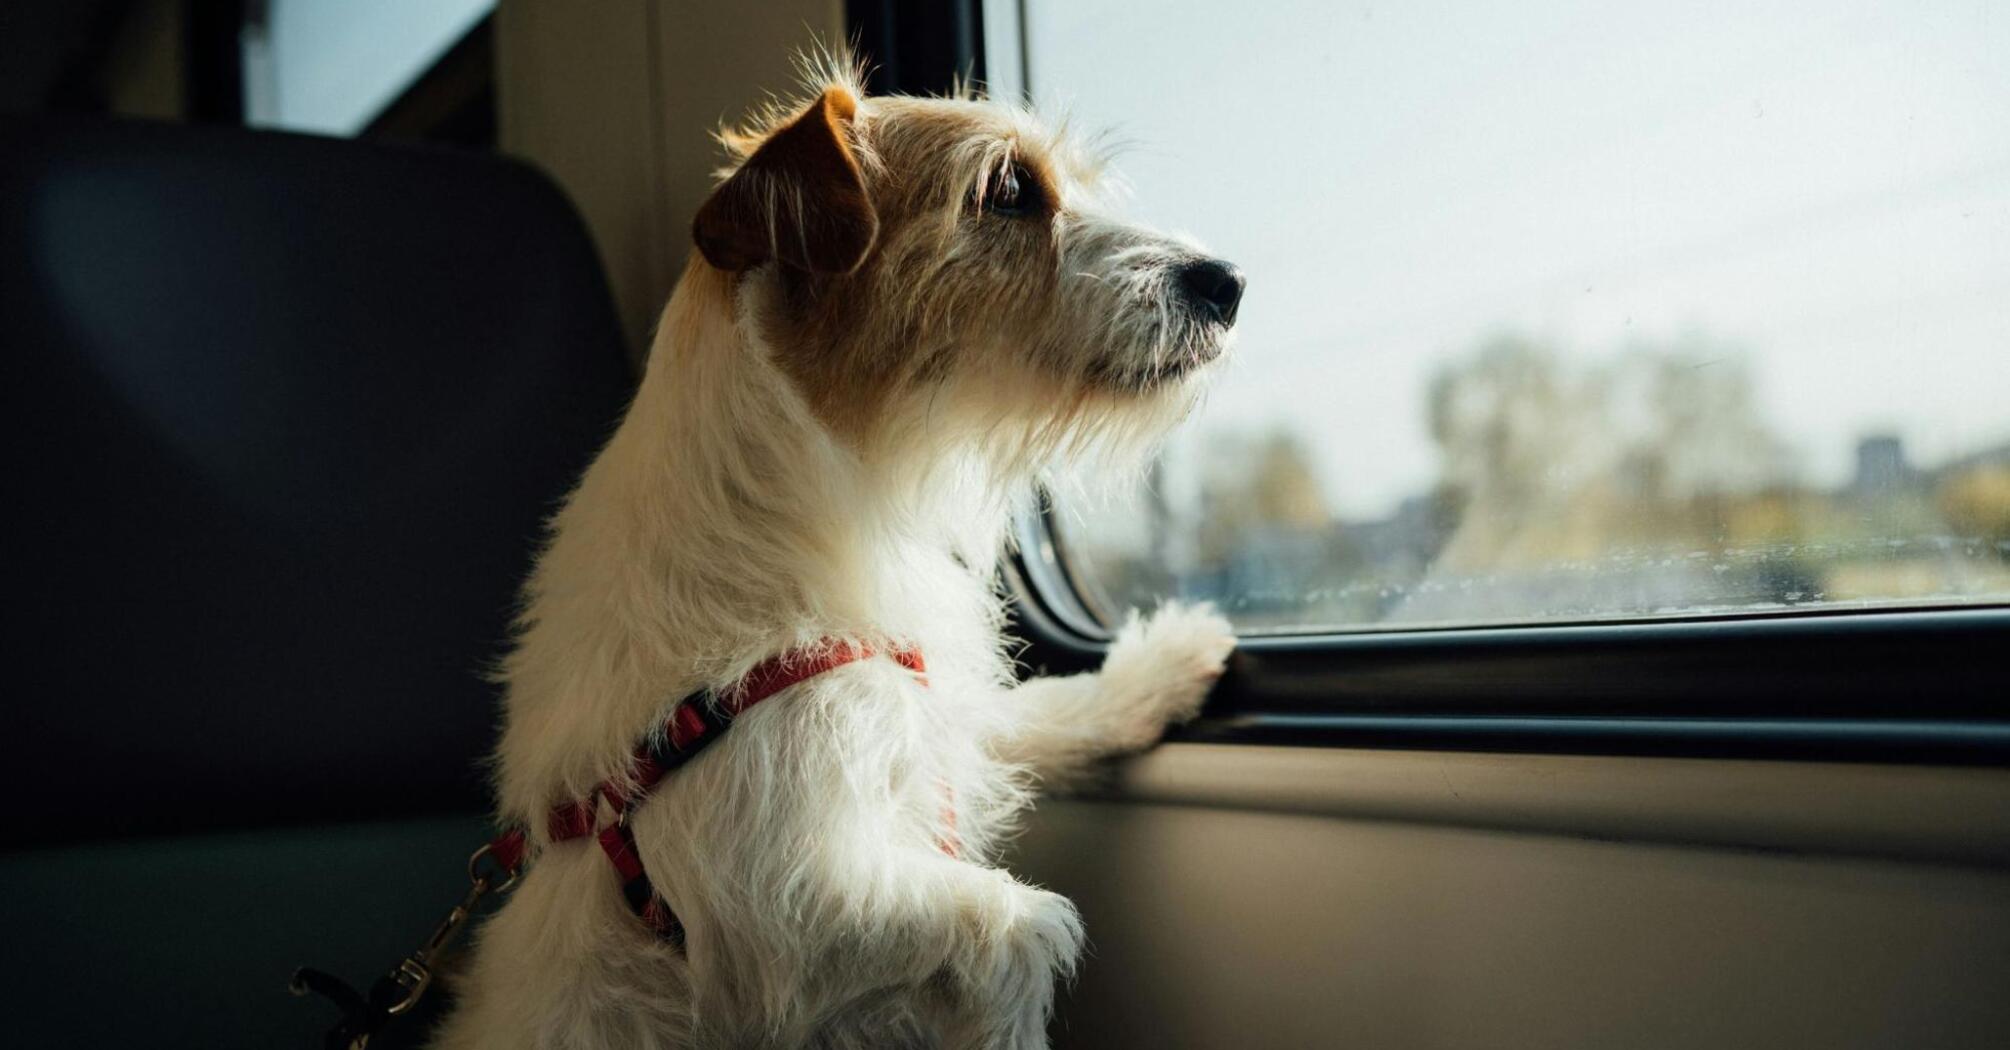 A dog on a train looks out the window enjoying the view